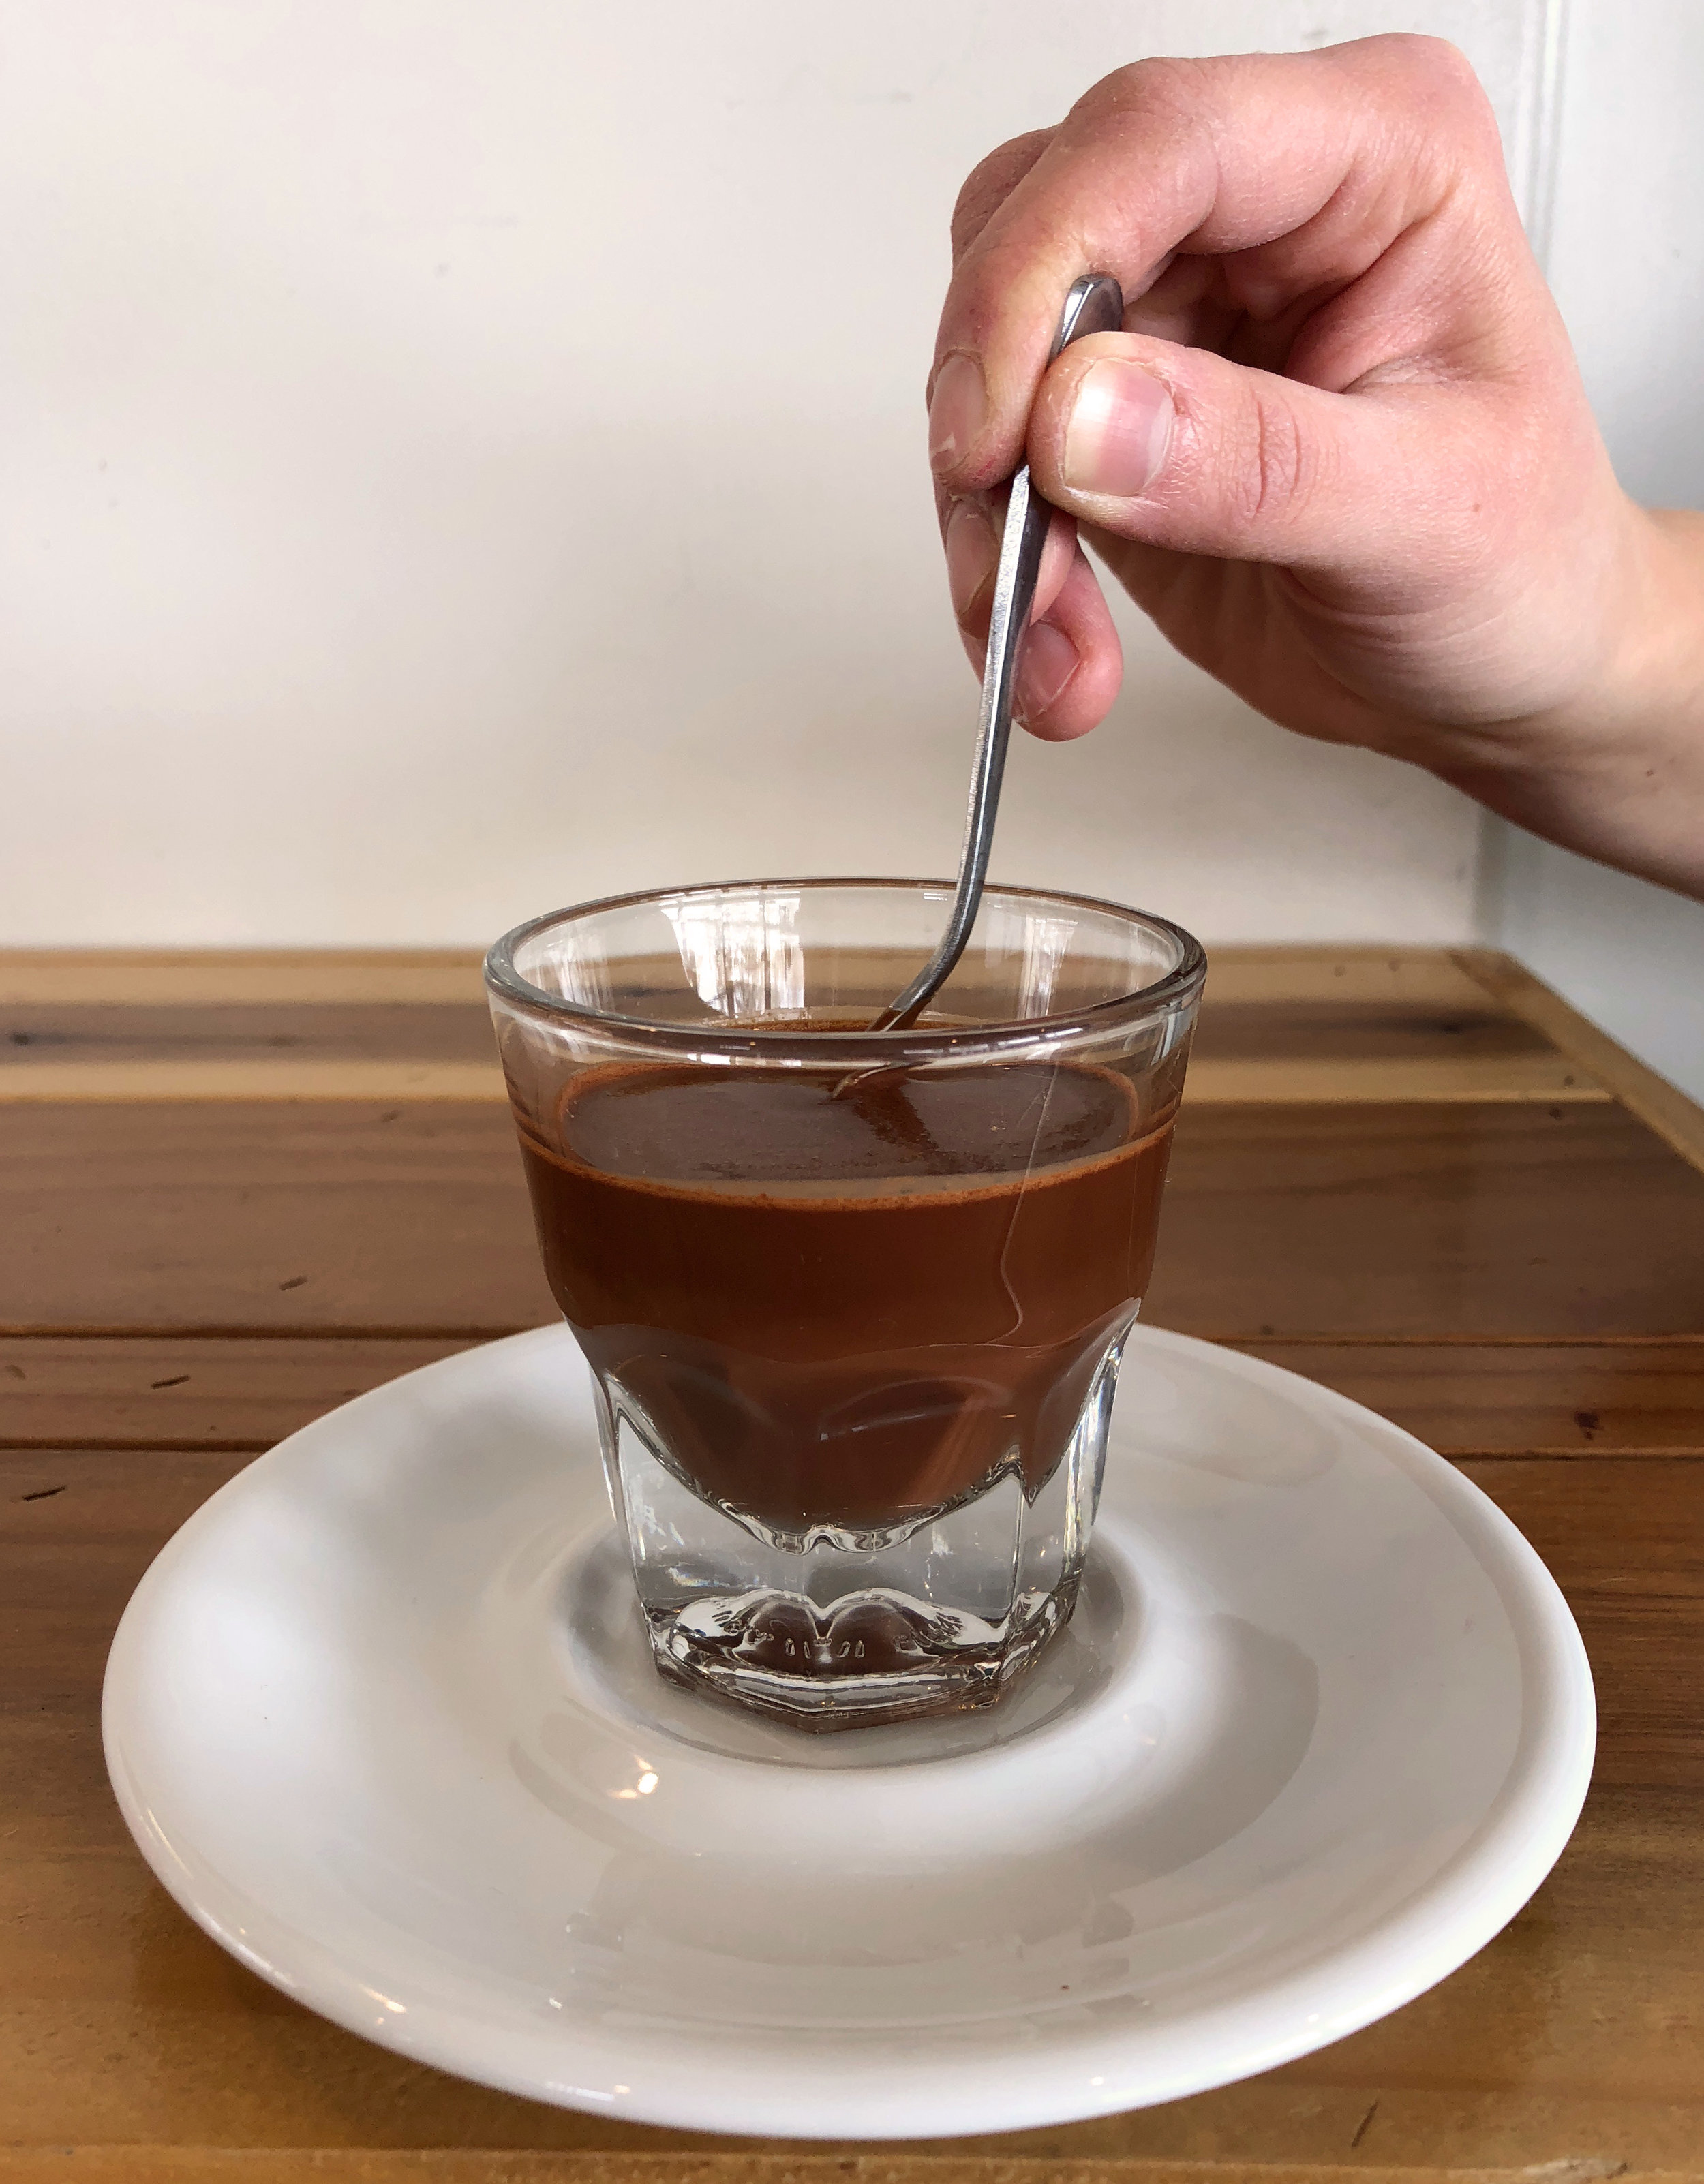 "Sipping Chocolate" is a delicious way to drink pure chocolate. The recipe is basically equal parts (by weight) ground chocolate to boiling water.